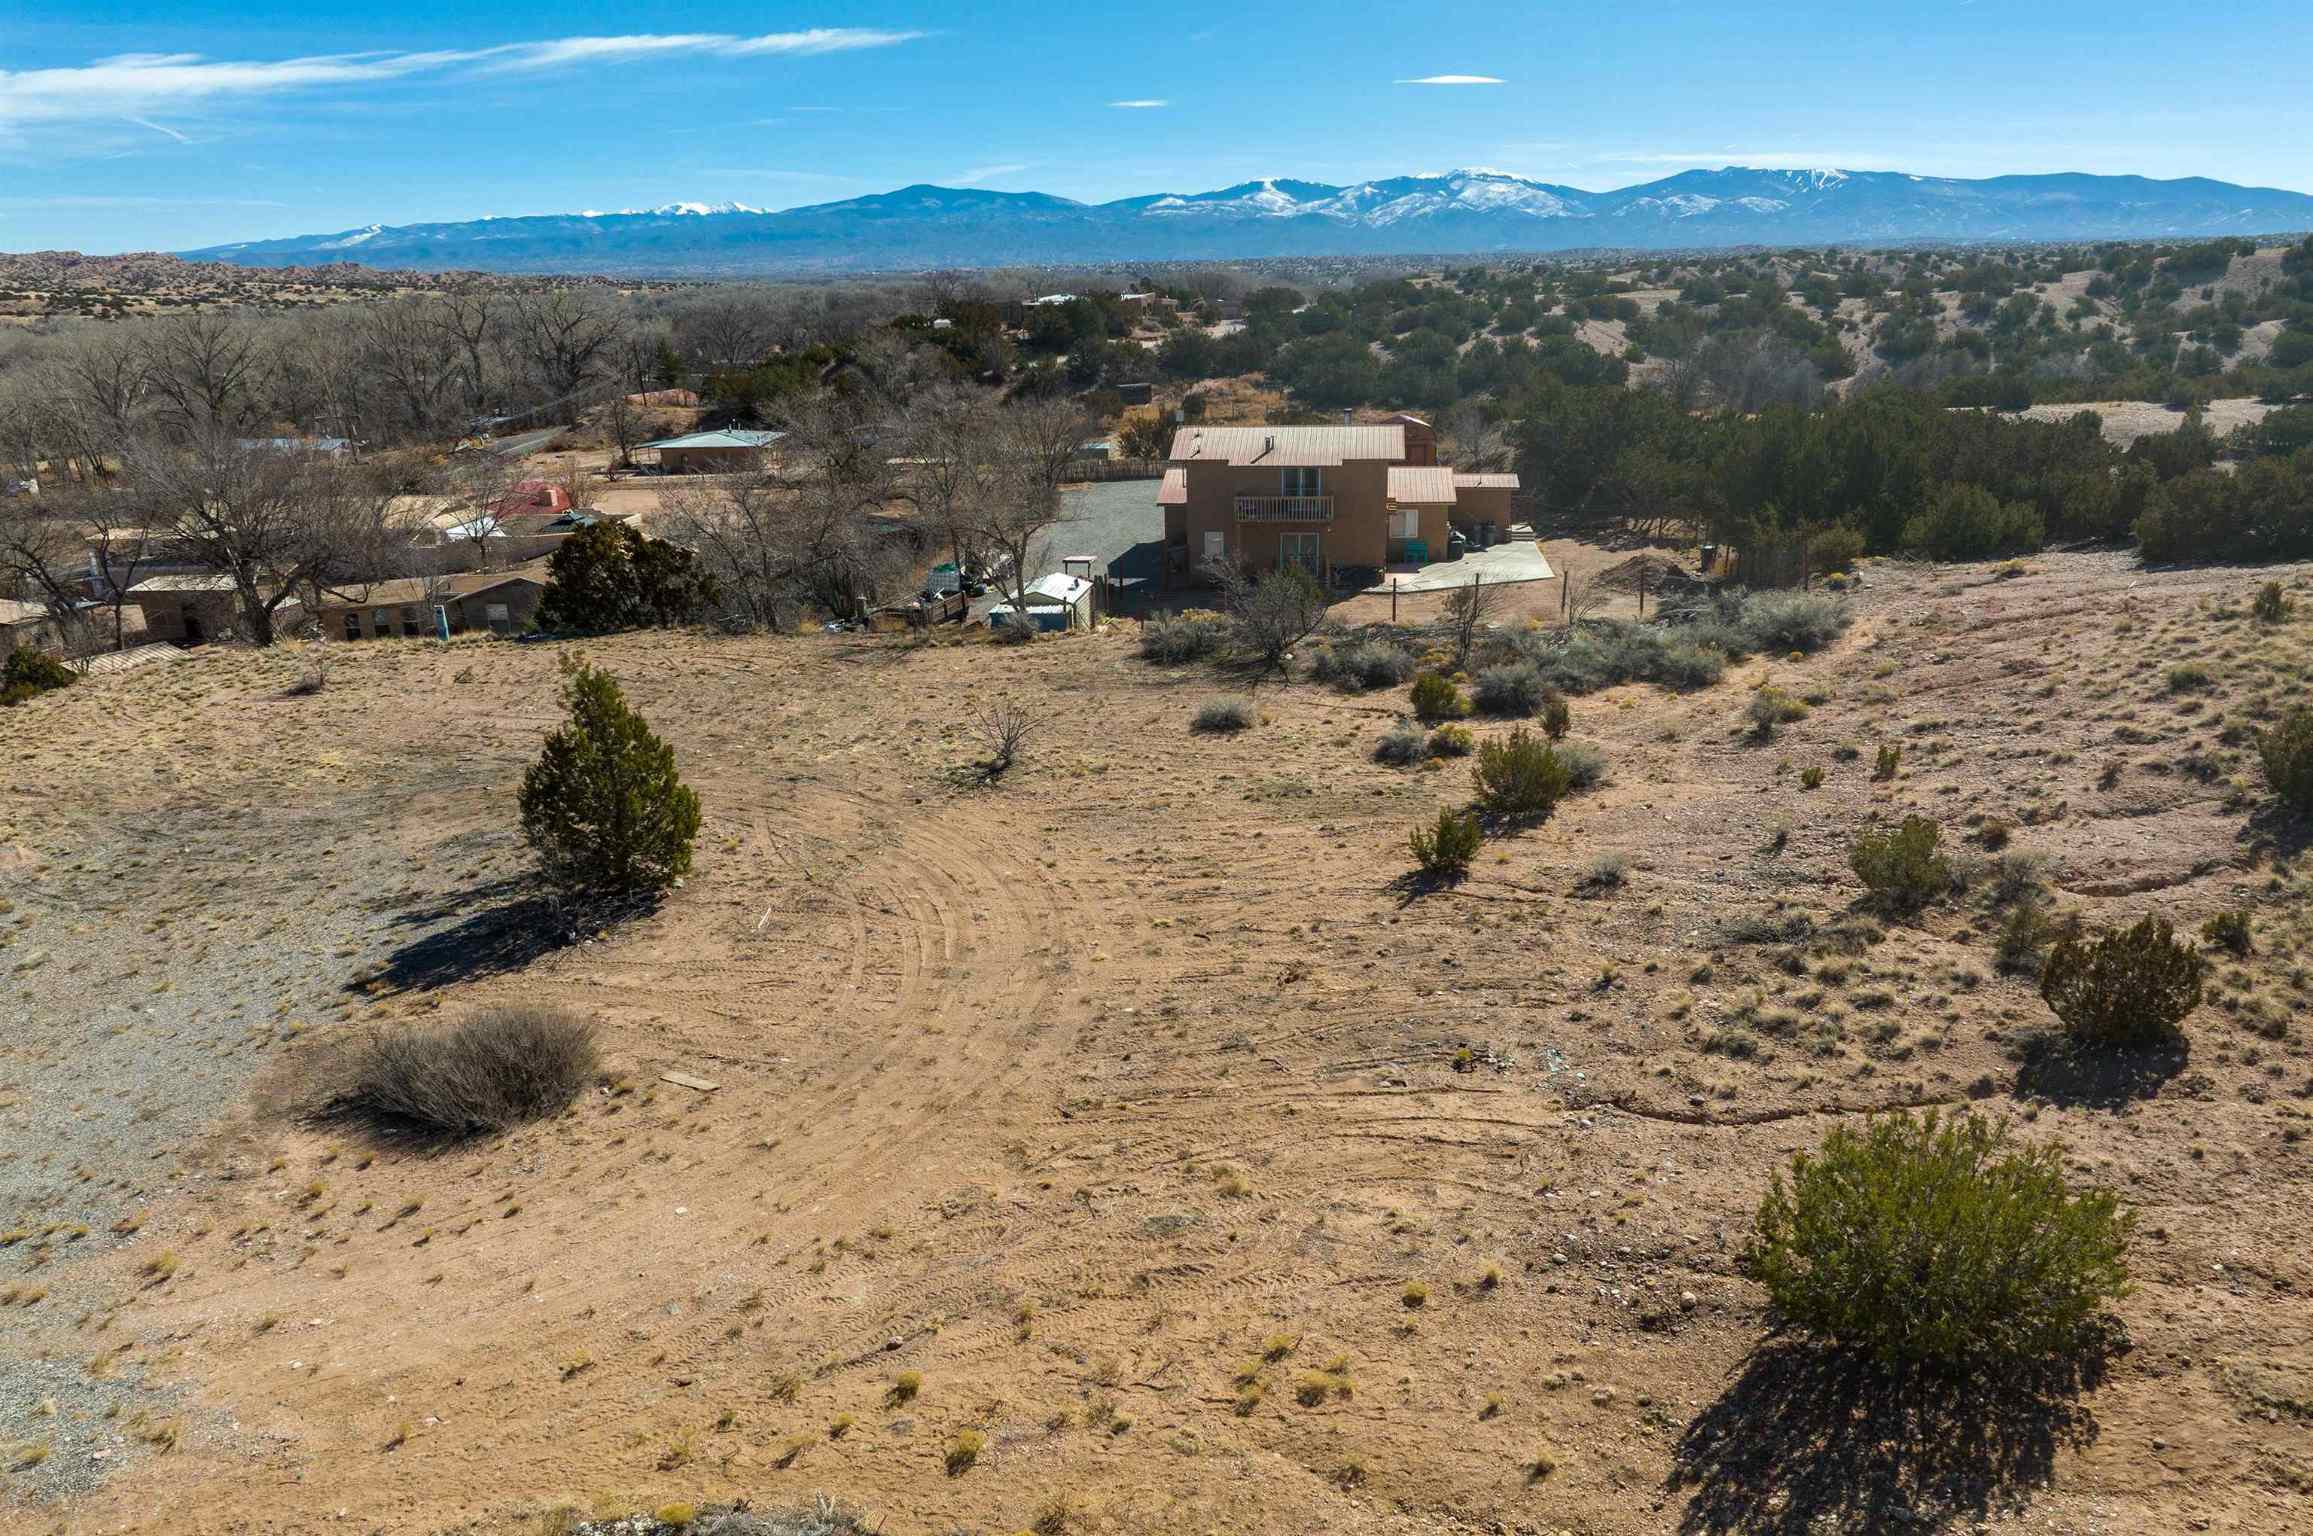 352 COUNTY RD 84, Santa Fe, New Mexico 87506, 2 Bedrooms Bedrooms, ,1 BathroomBathrooms,Residential,For Sale,352 COUNTY RD 84,202201120